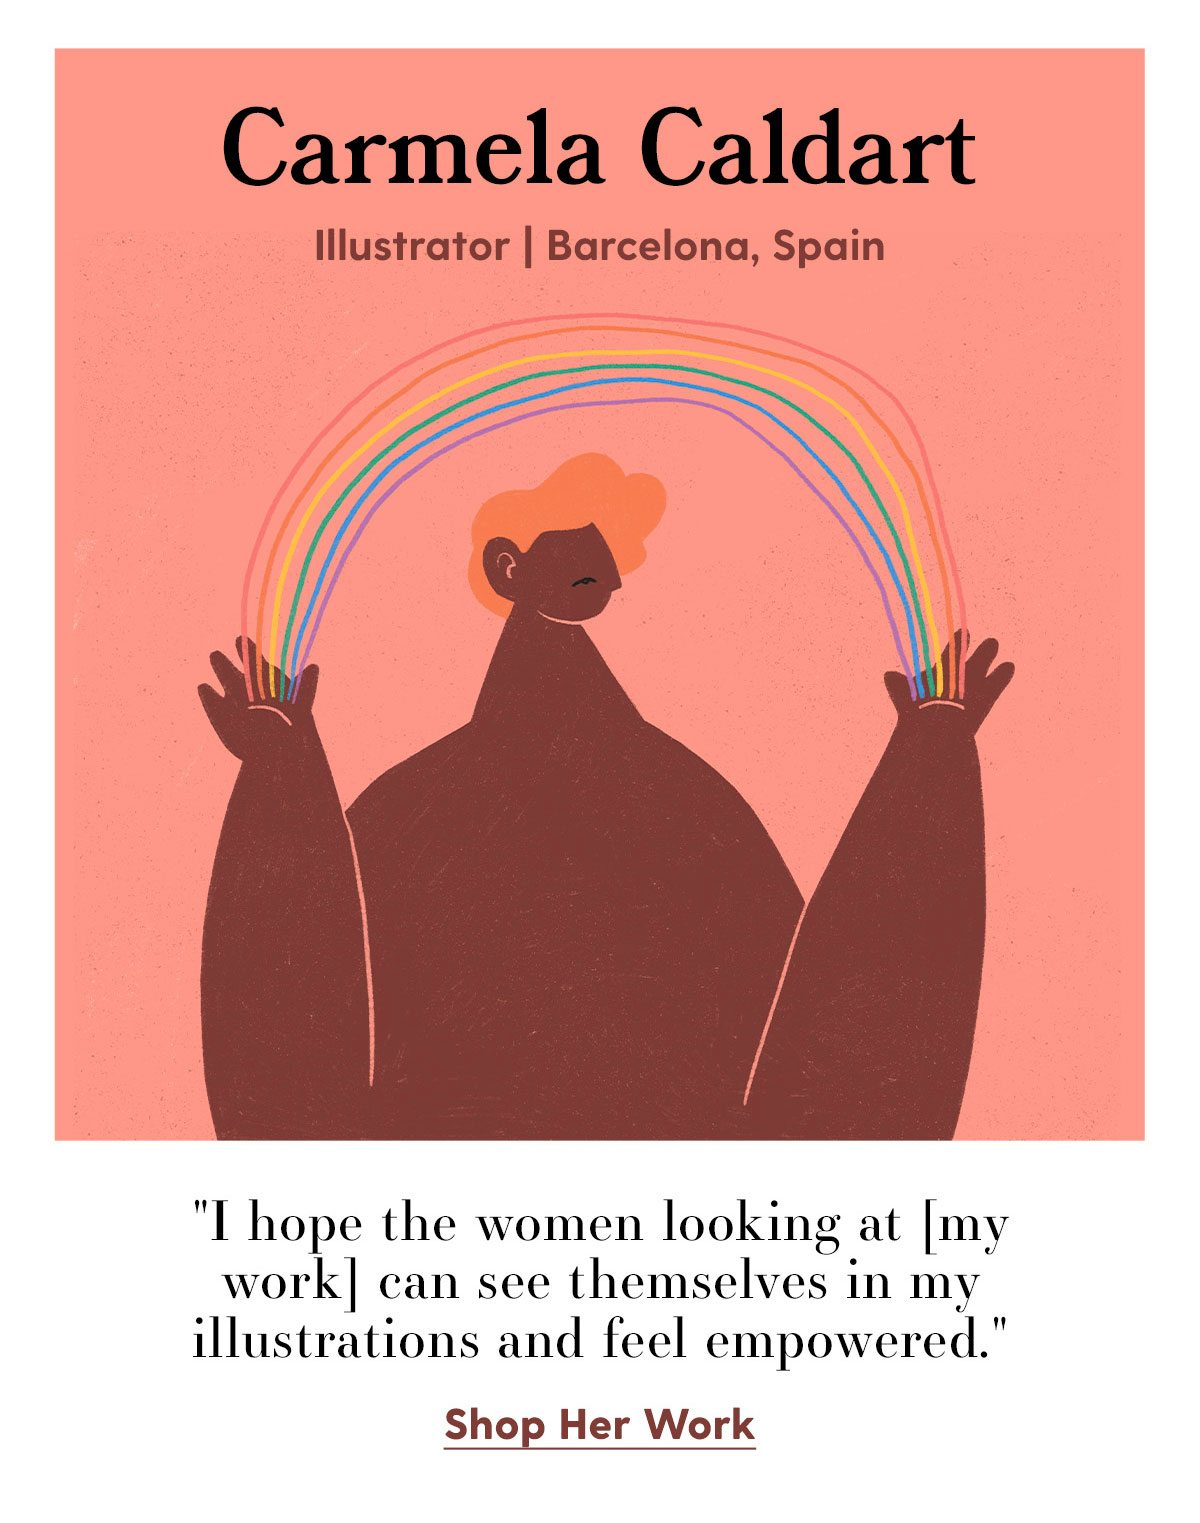 Carmela Caldart - Illustrator | Barcelona, Spain. 'I hope the women looking at [my work] can see themselves in my illustrations and feel empowered.' Shop Her Work